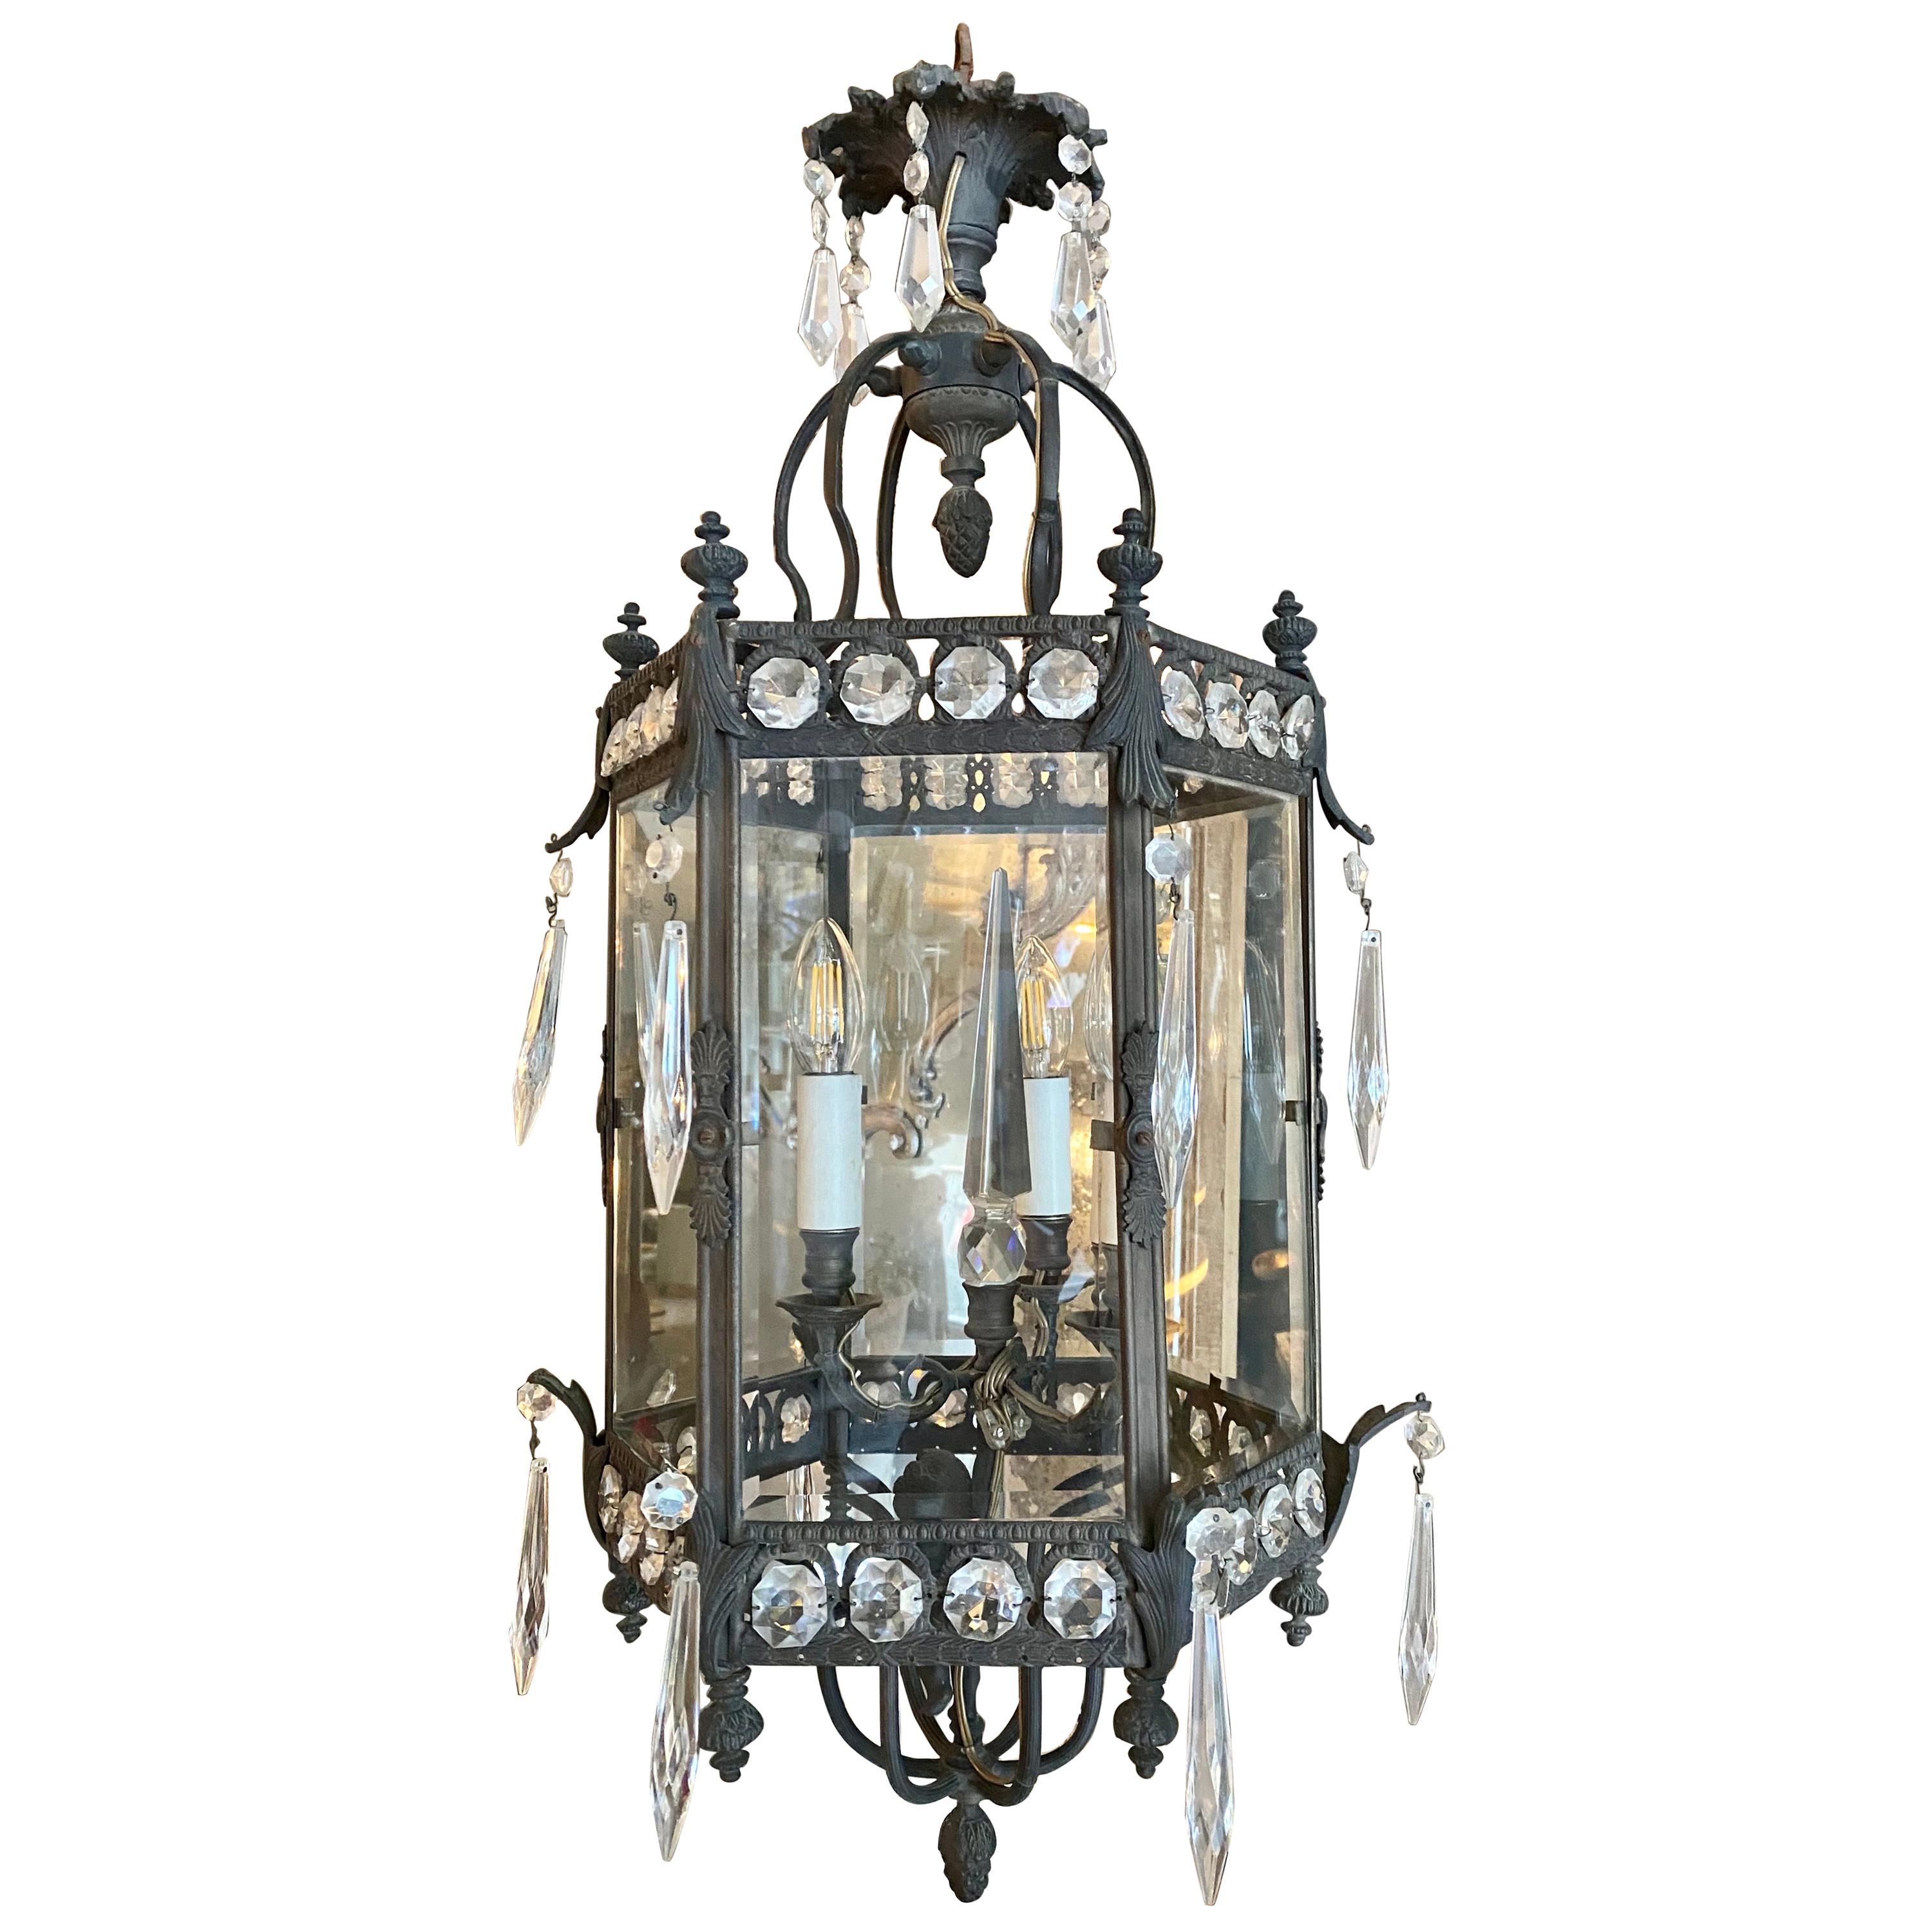 A pair of 19th century French lanterns in bronze with glass adornments and interior crystal prism. The panelled glass hexagon shaped frame decorated with acorns and foliage embellishments. Dressed with glass drops. The interior light branch is